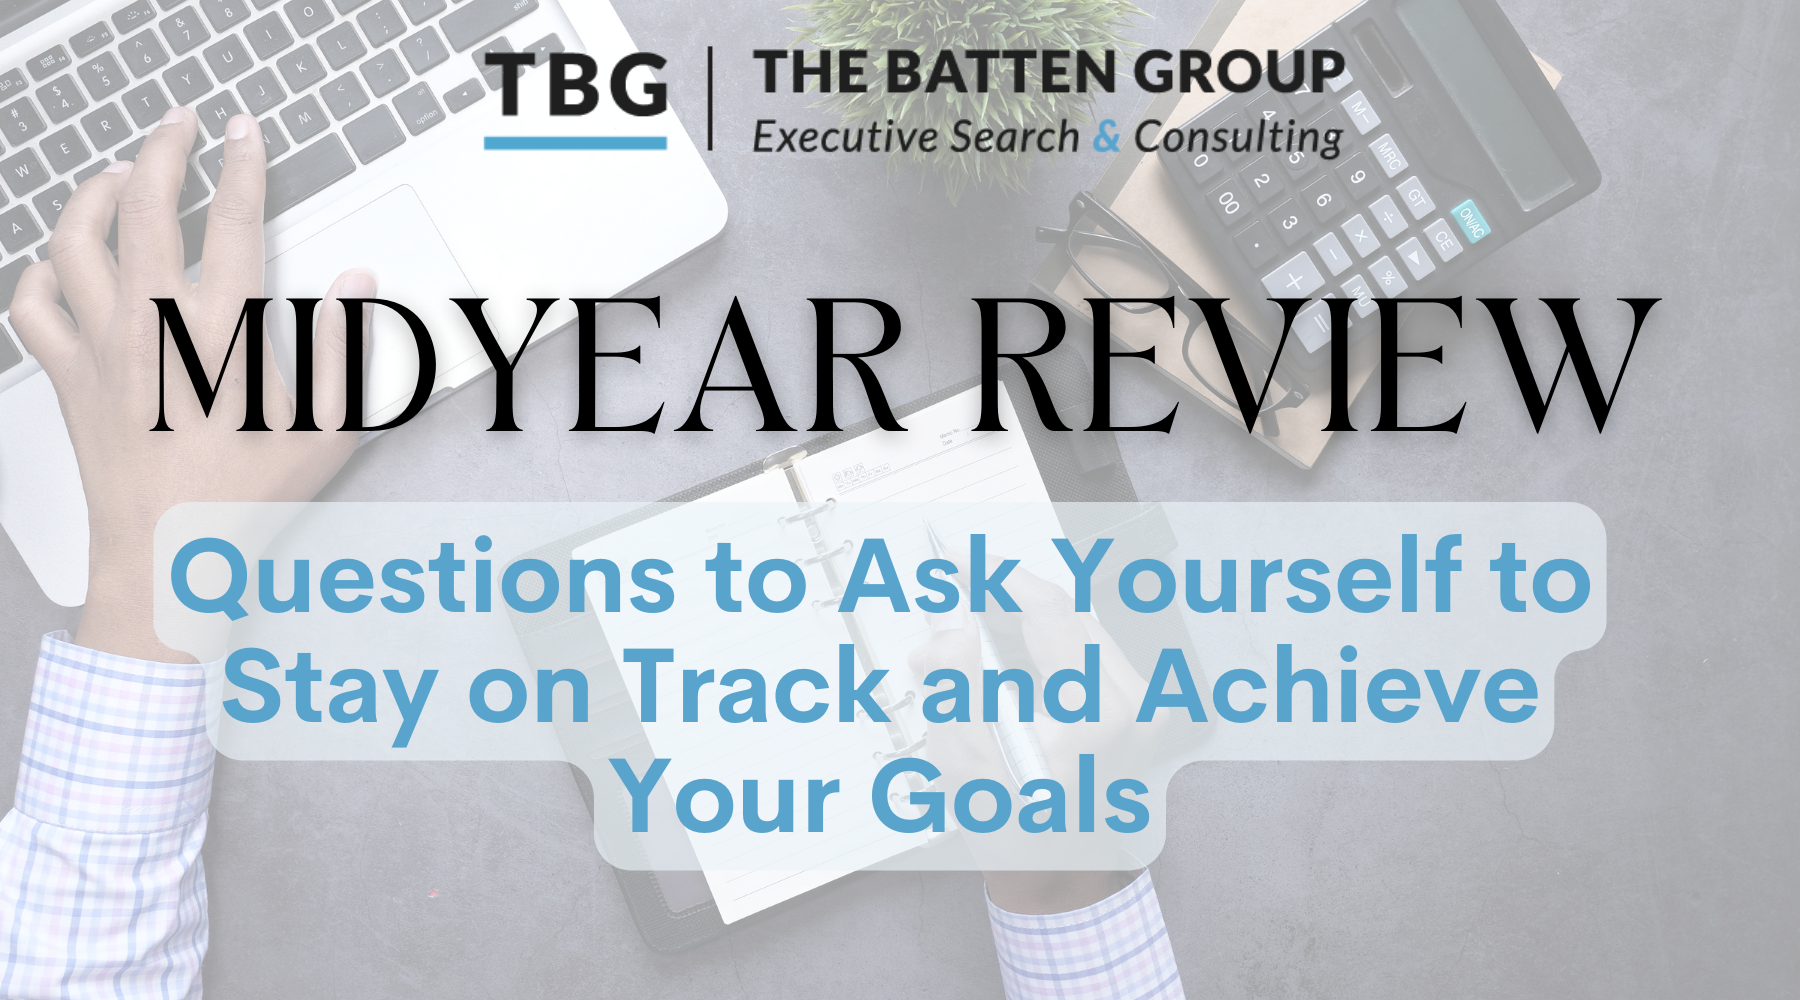 Midyear Review: Questions to Ask Yourself to Stay on Track and Achieve Your Goals